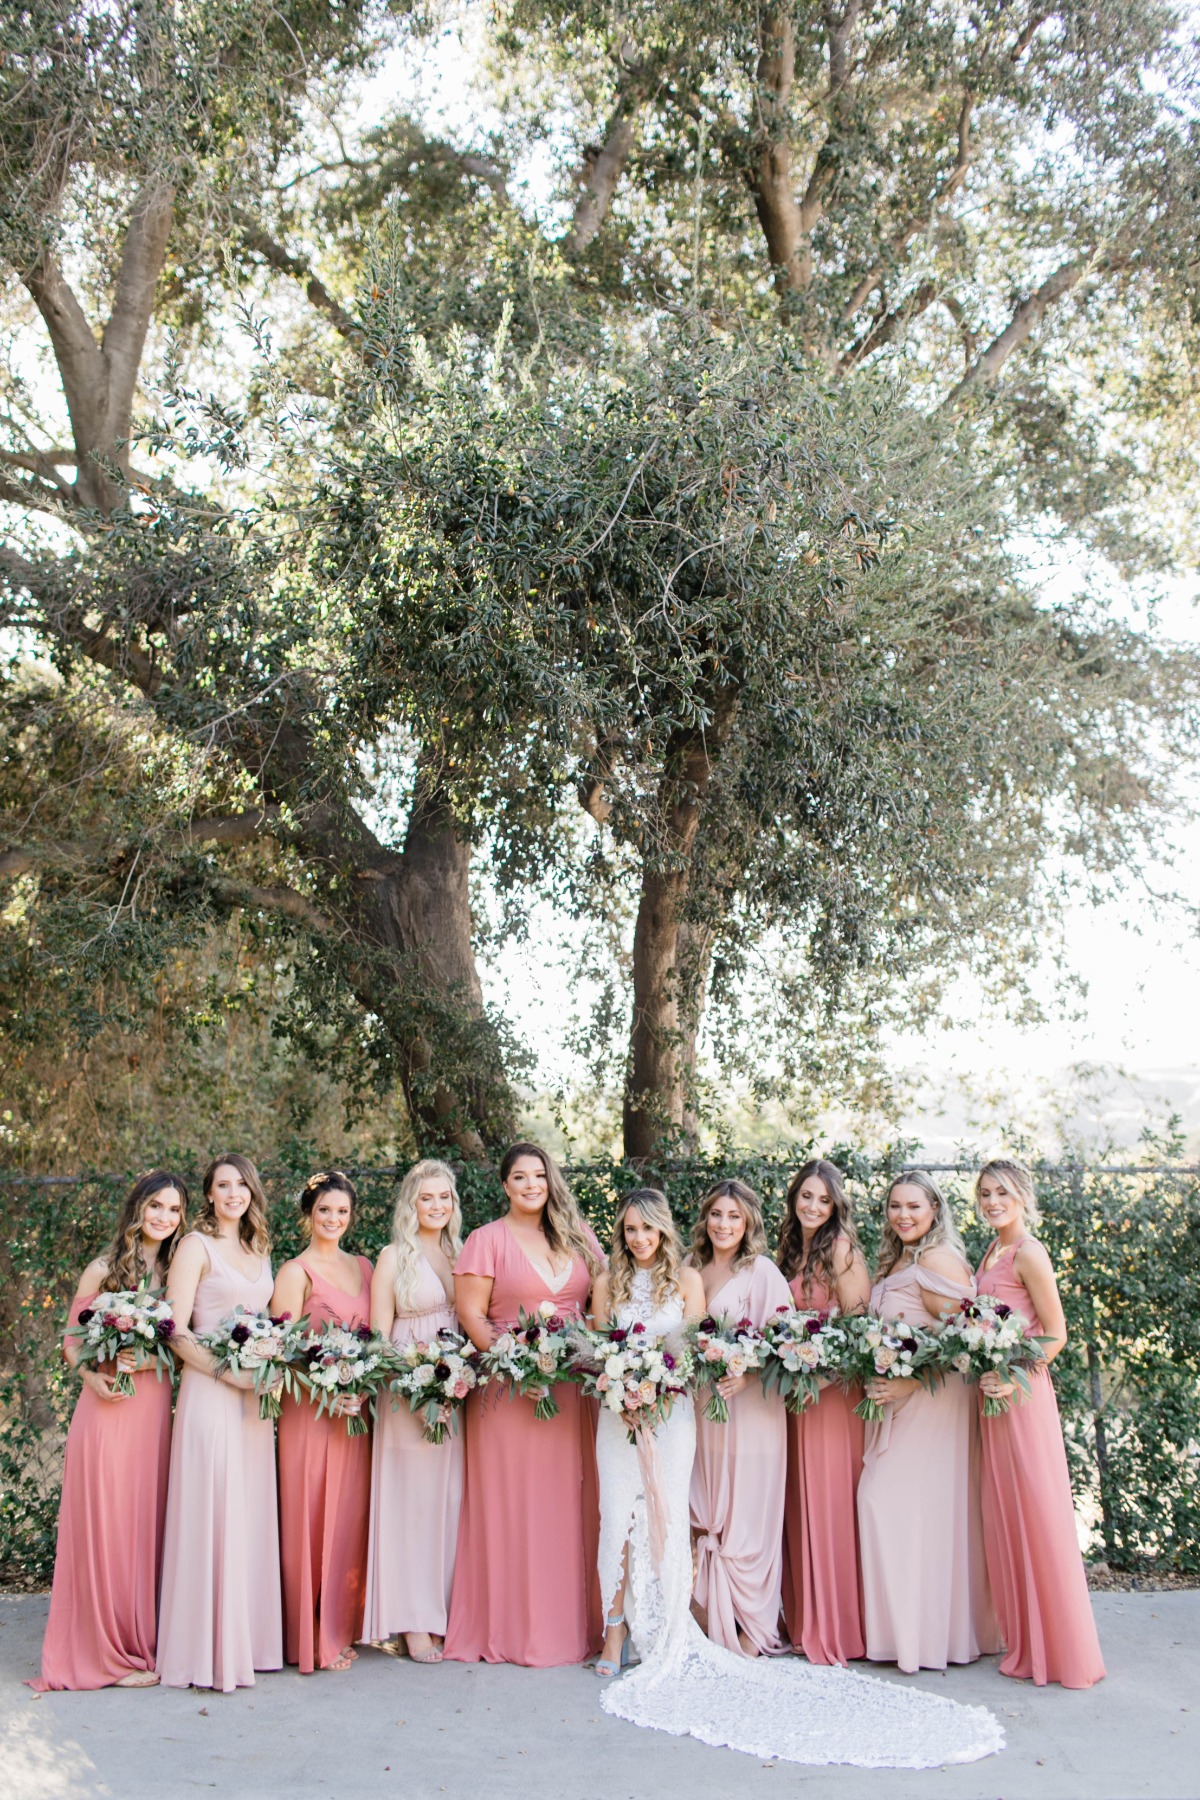 Bridesmaids in shades of pink